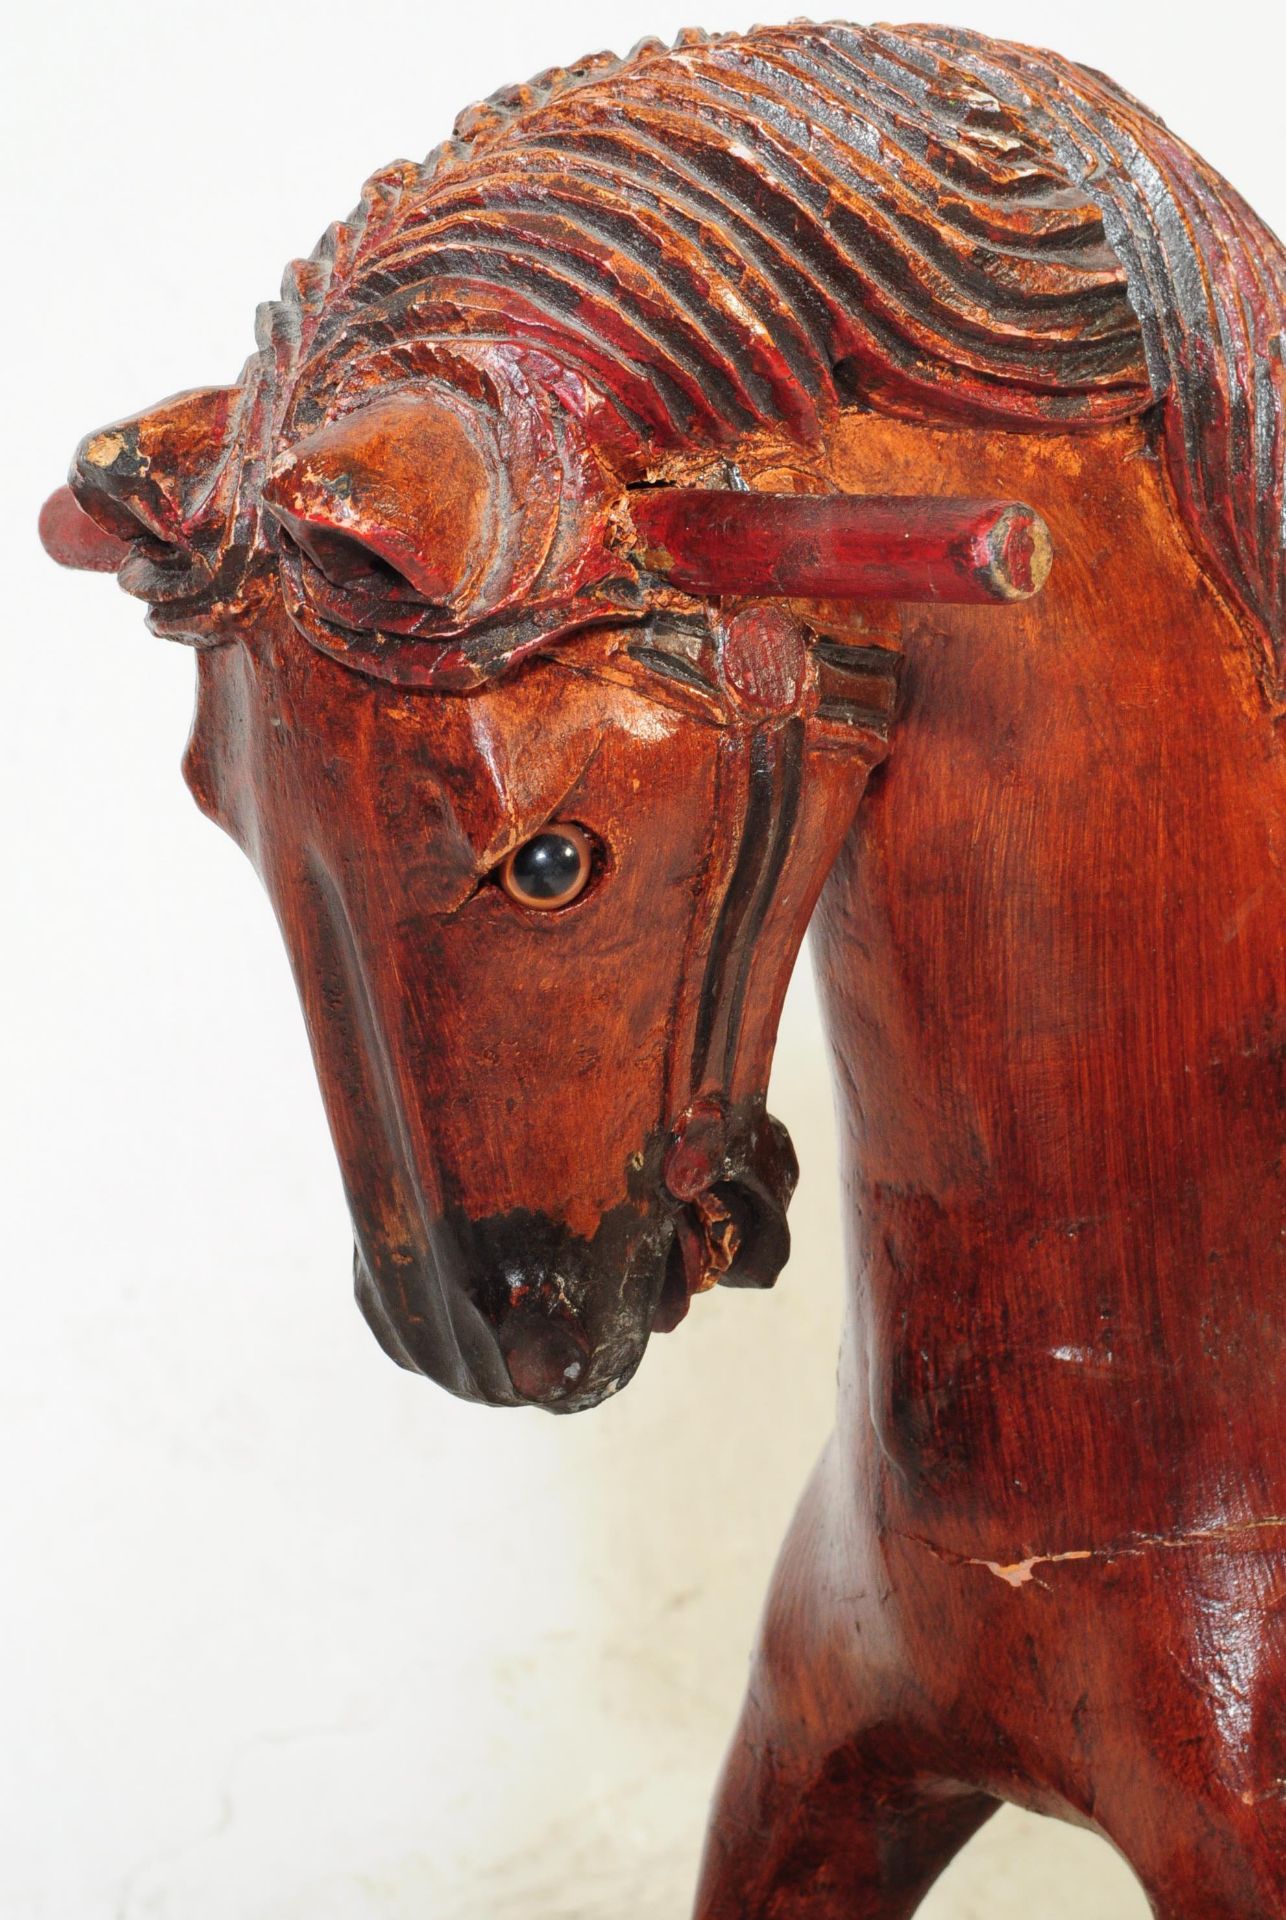 VICTORIAN REVIVAL CARVED ROCKING HORSE WITH LEATHER SADDLE - Image 4 of 5